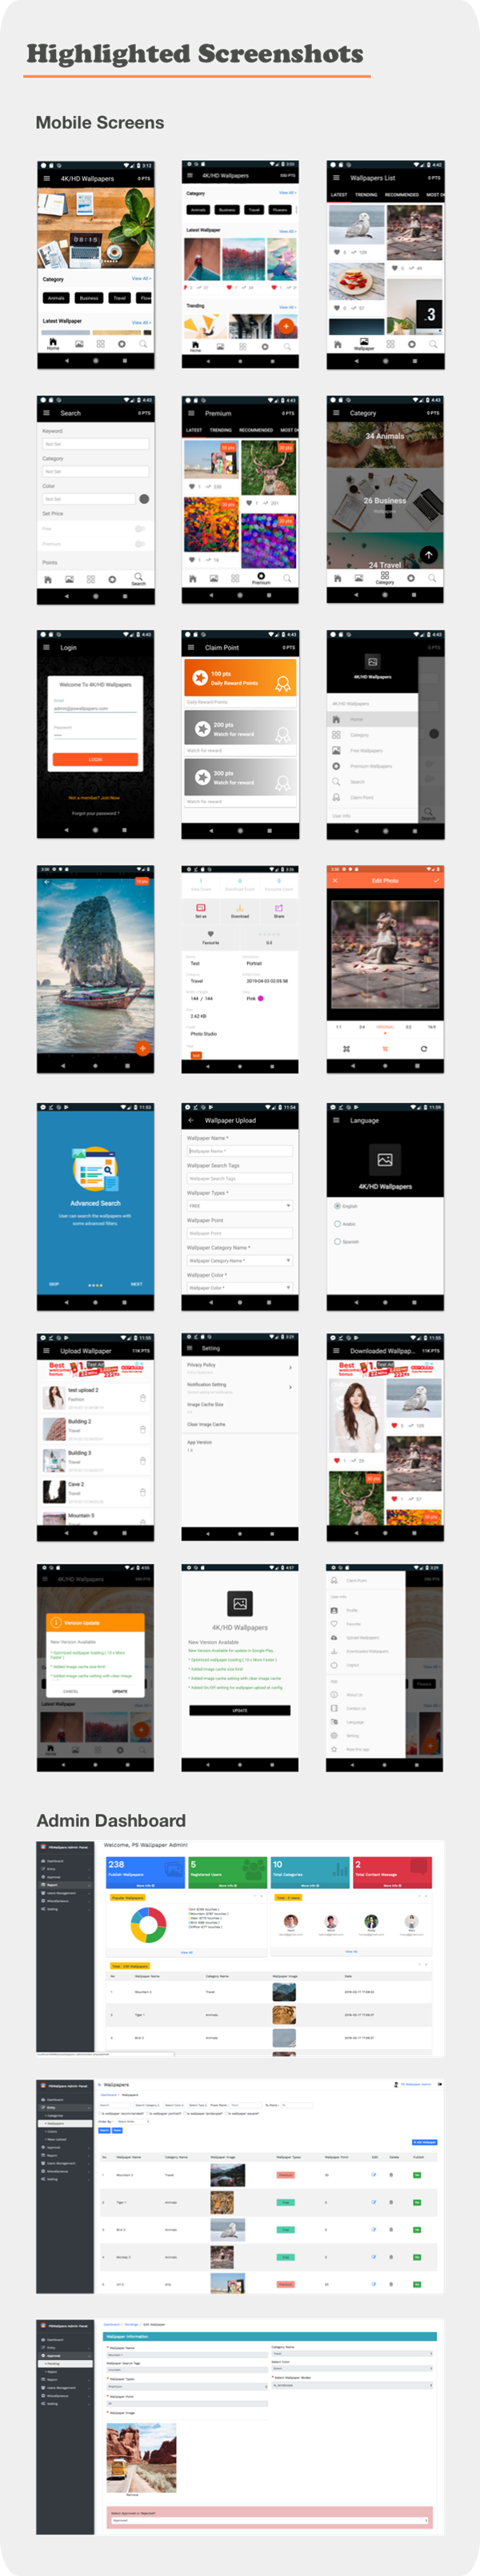 4K/HD Wallpaper Android App ( Auto Shuffle + Gif + Live + Admob + Firebase Noti + PHP Backend) 2.8 - 8